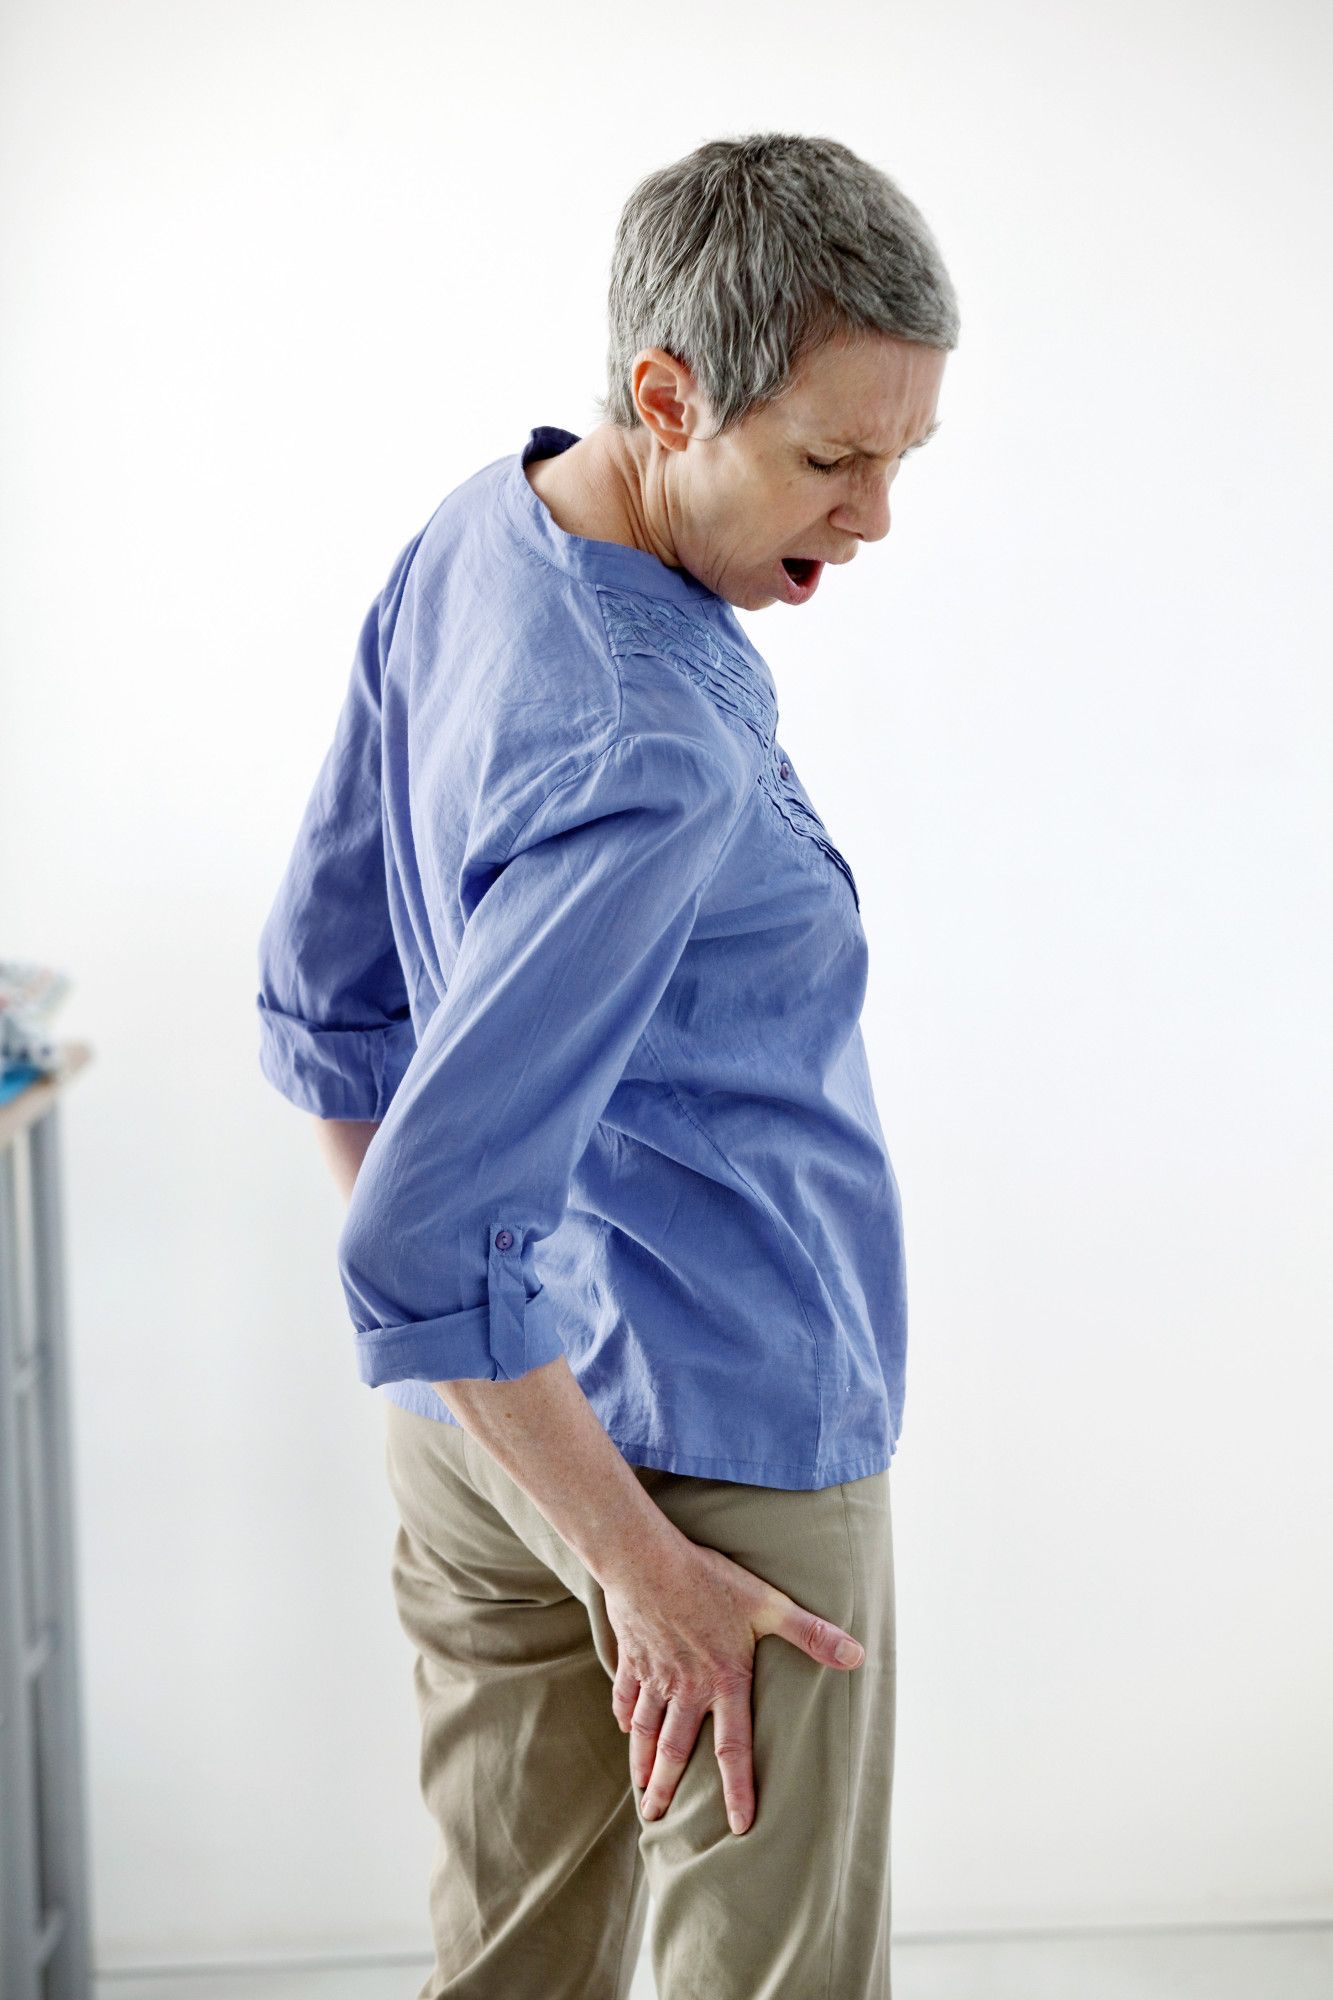 What Is Sciatica? Everything You Need to Know